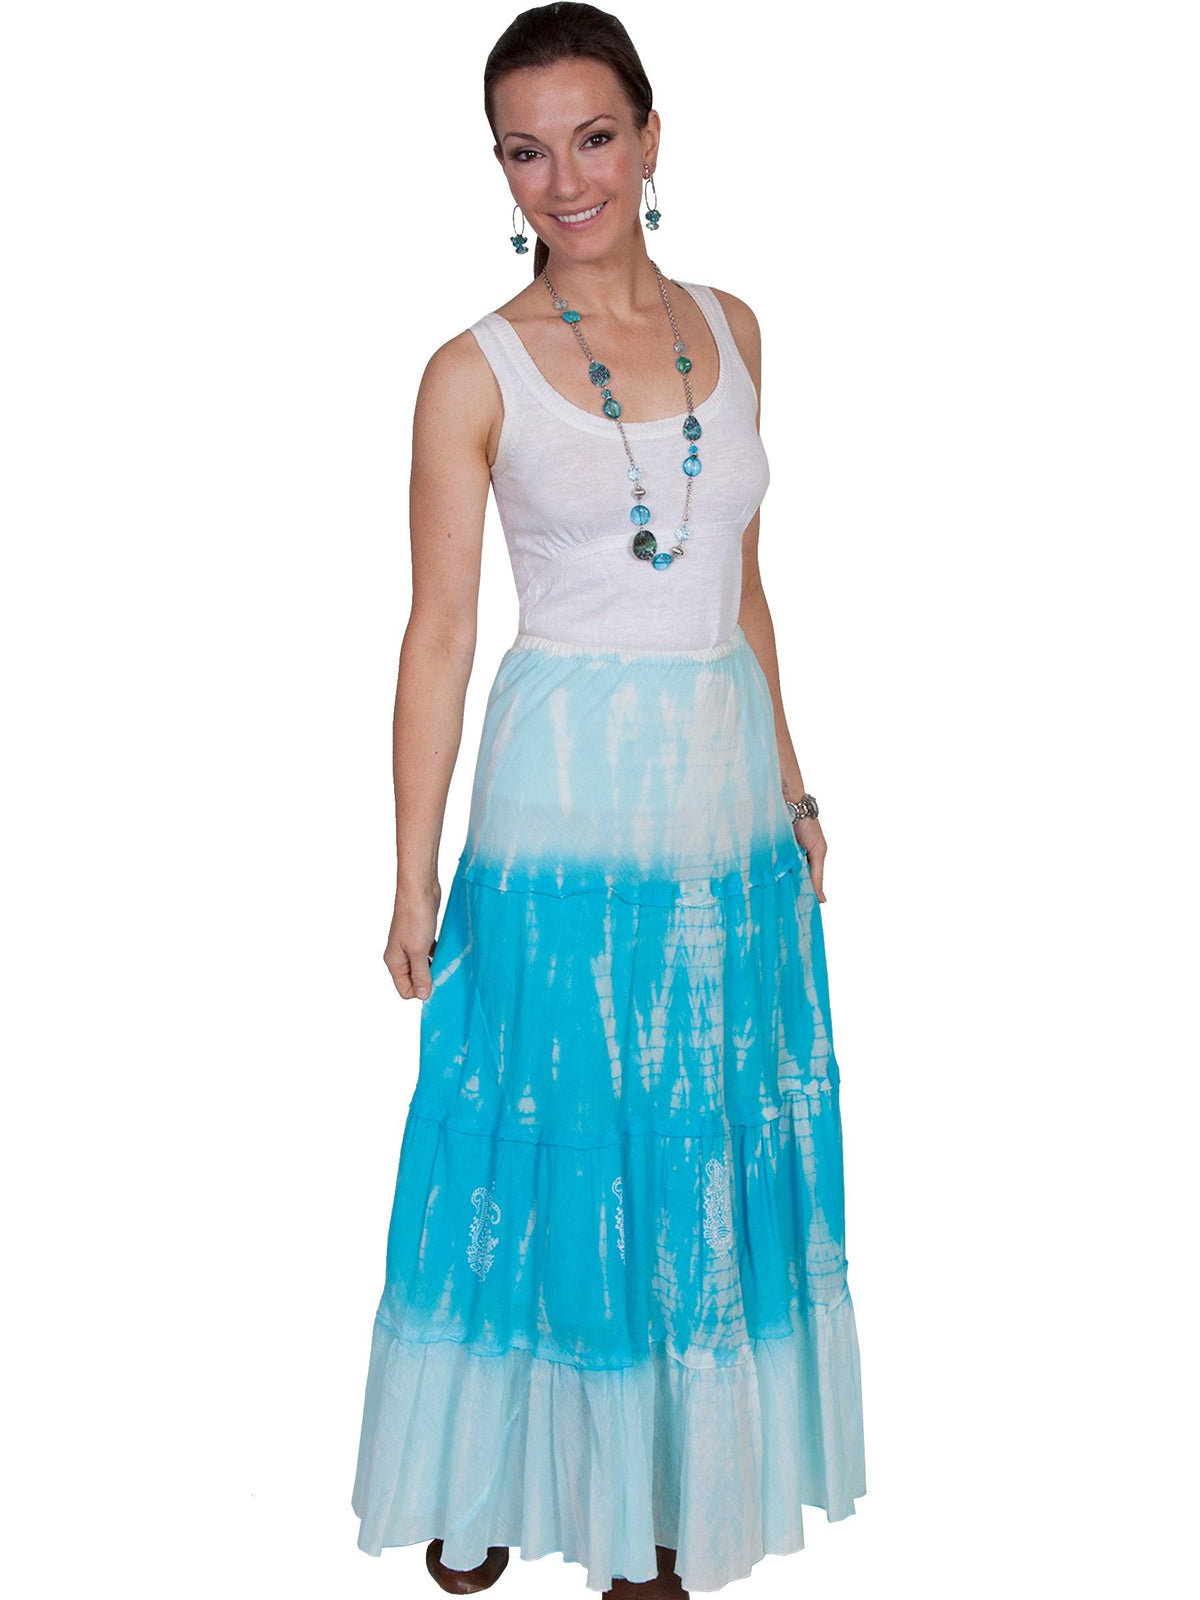 Scully TURQUOISE TIE-DYE SKIRT W/PAISLEY STENCIL - Flyclothing LLC